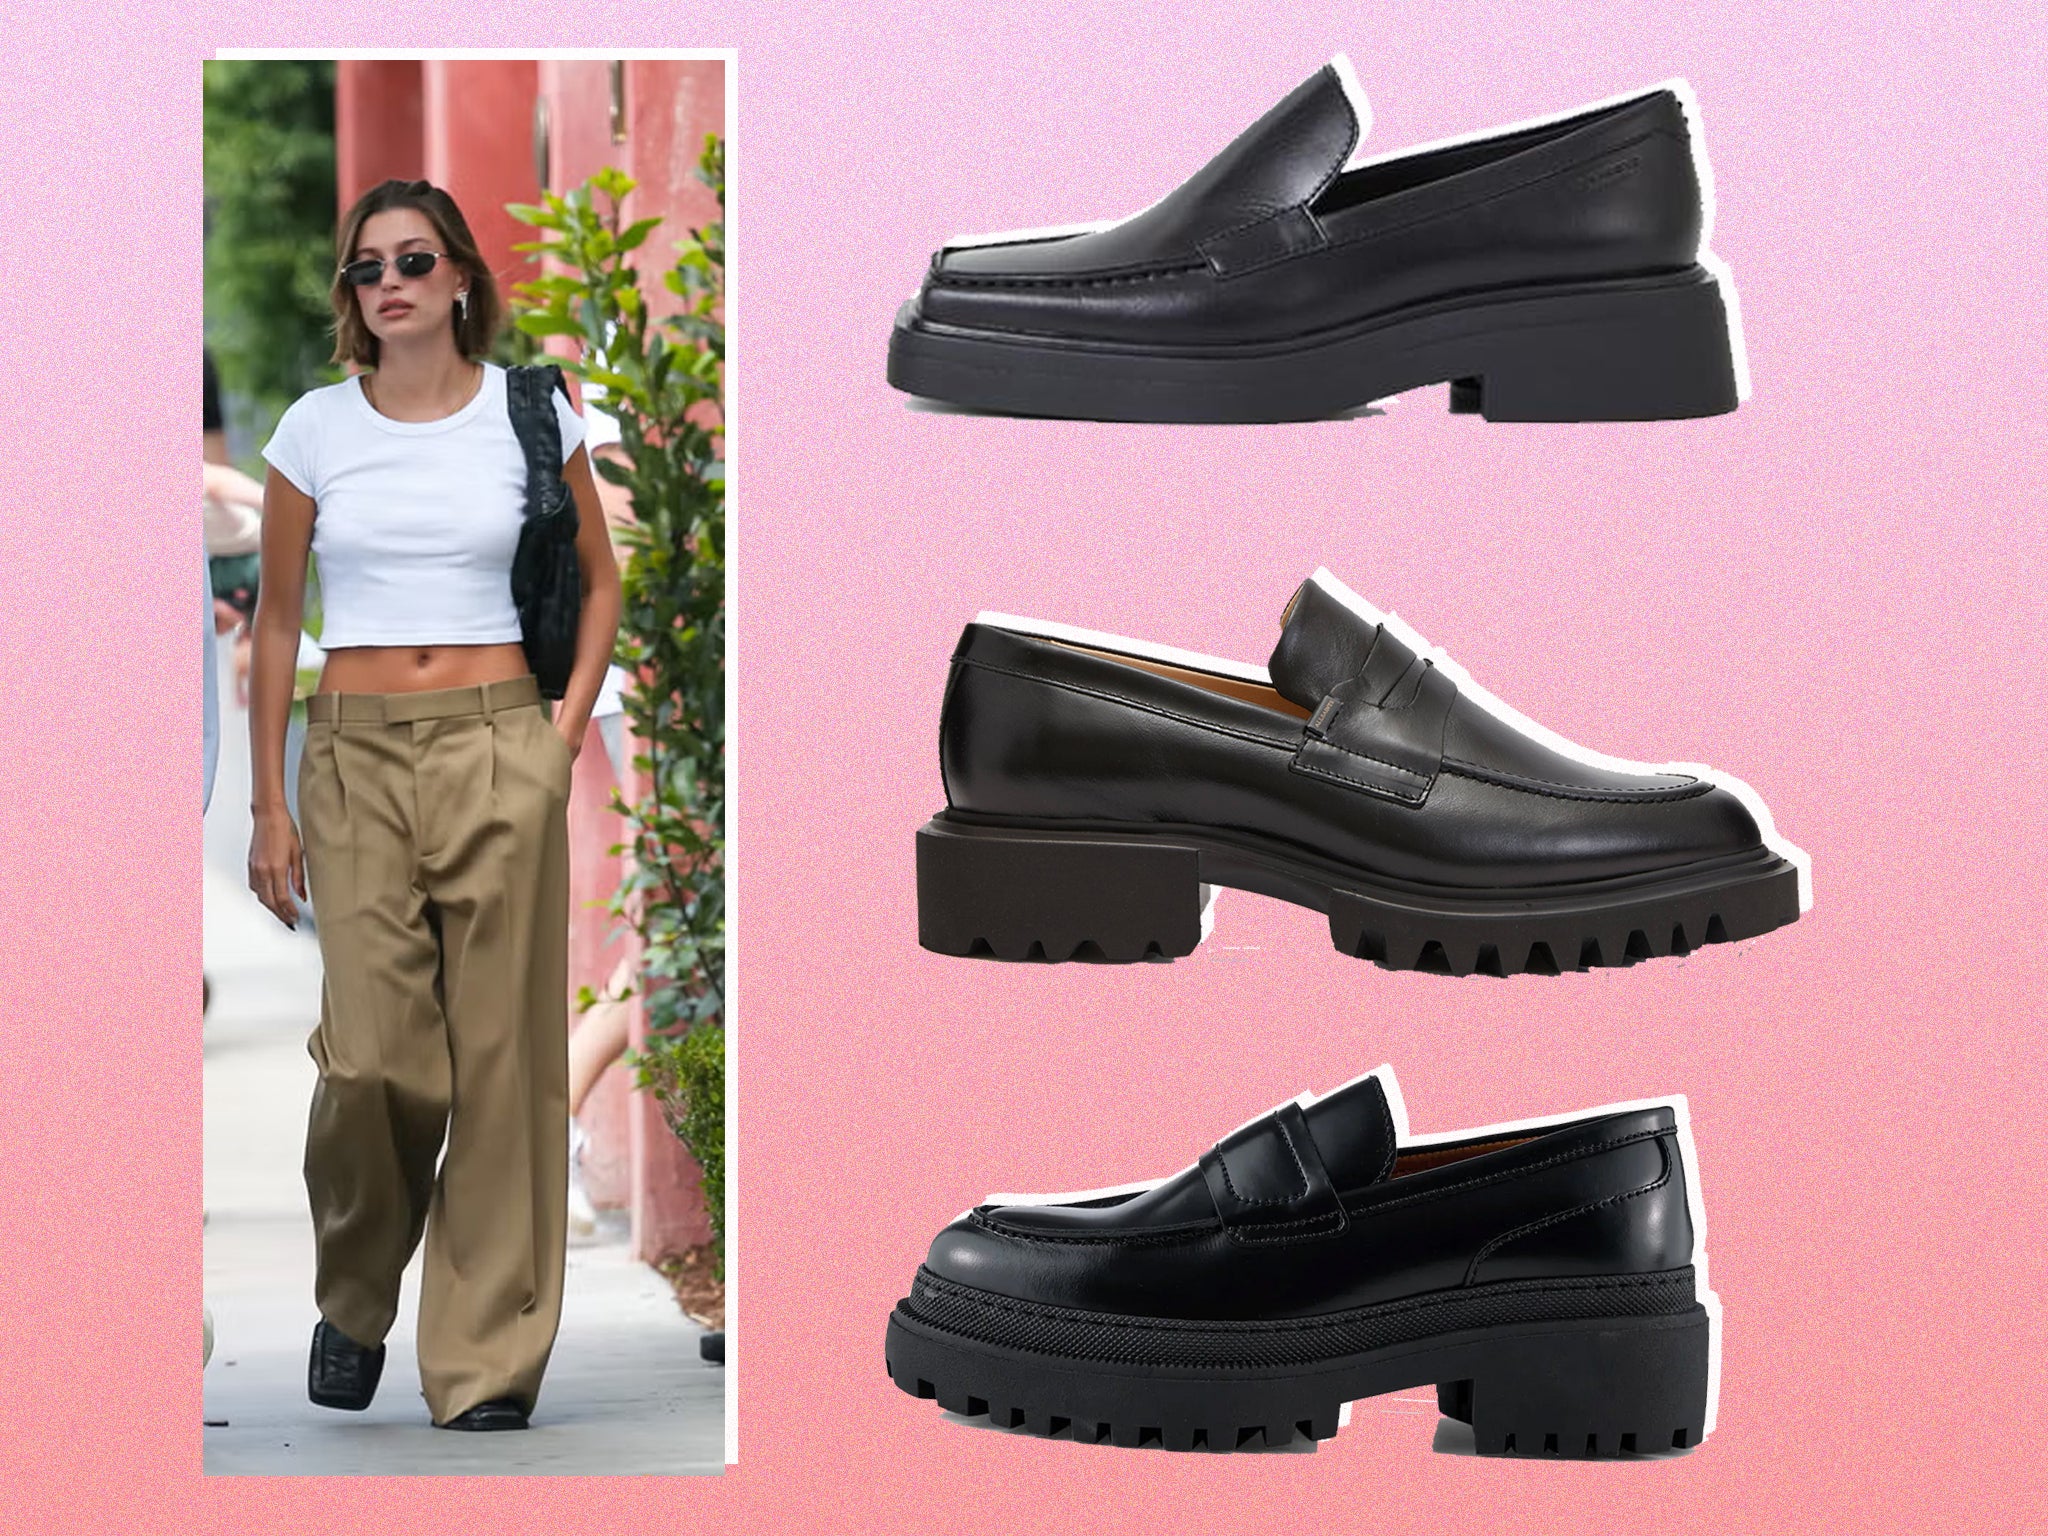 Hailey Bieber's Vagabond loafers are sale for under The Independent